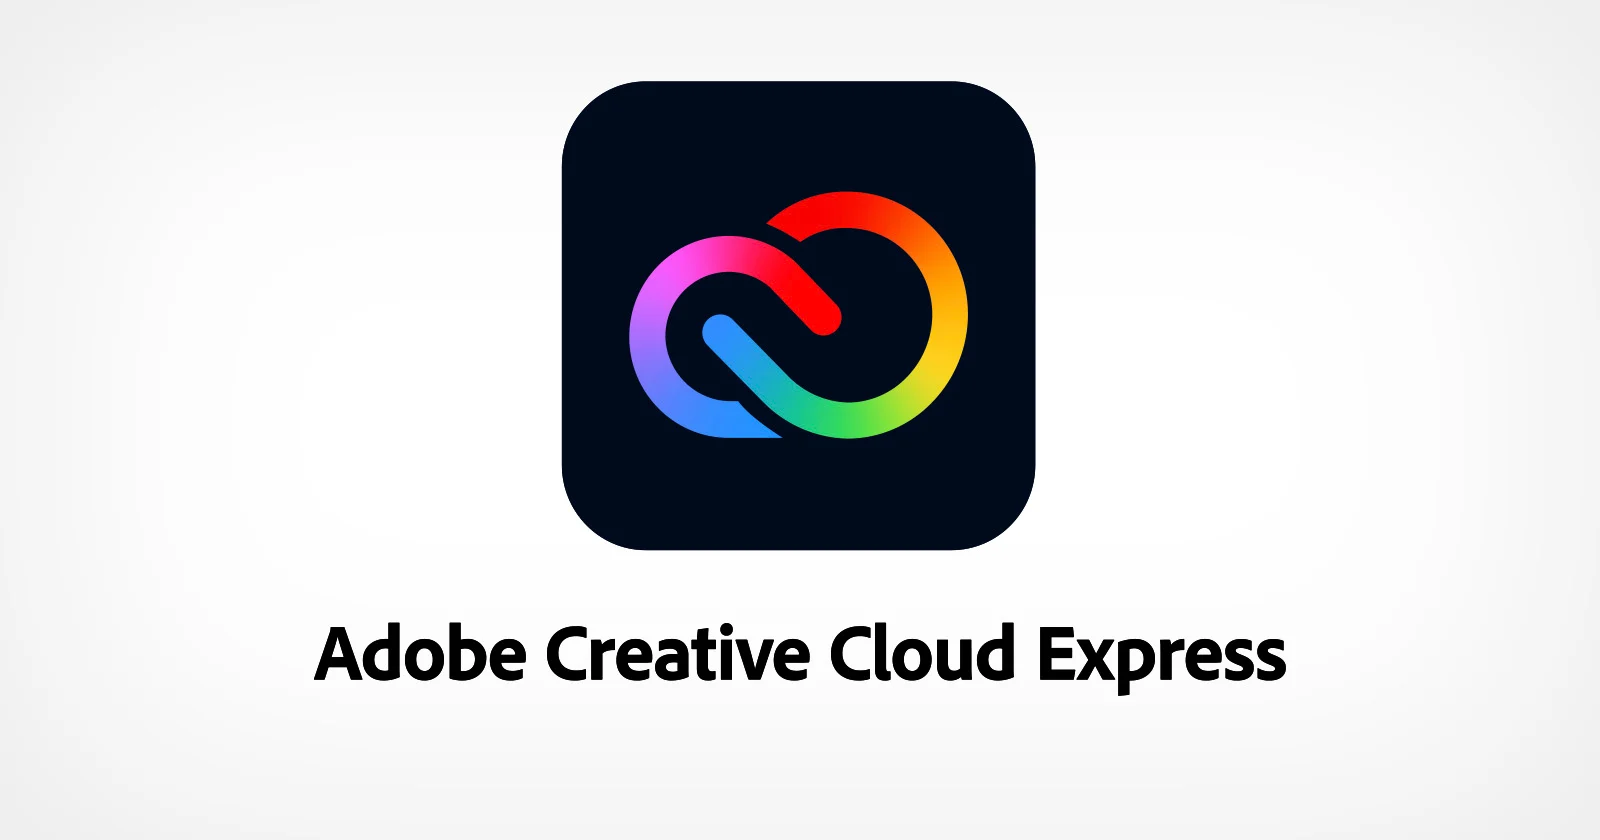 Adobe-Launches-Creative-Cloud-Express-a-New-Entry-Level-Platform.webp